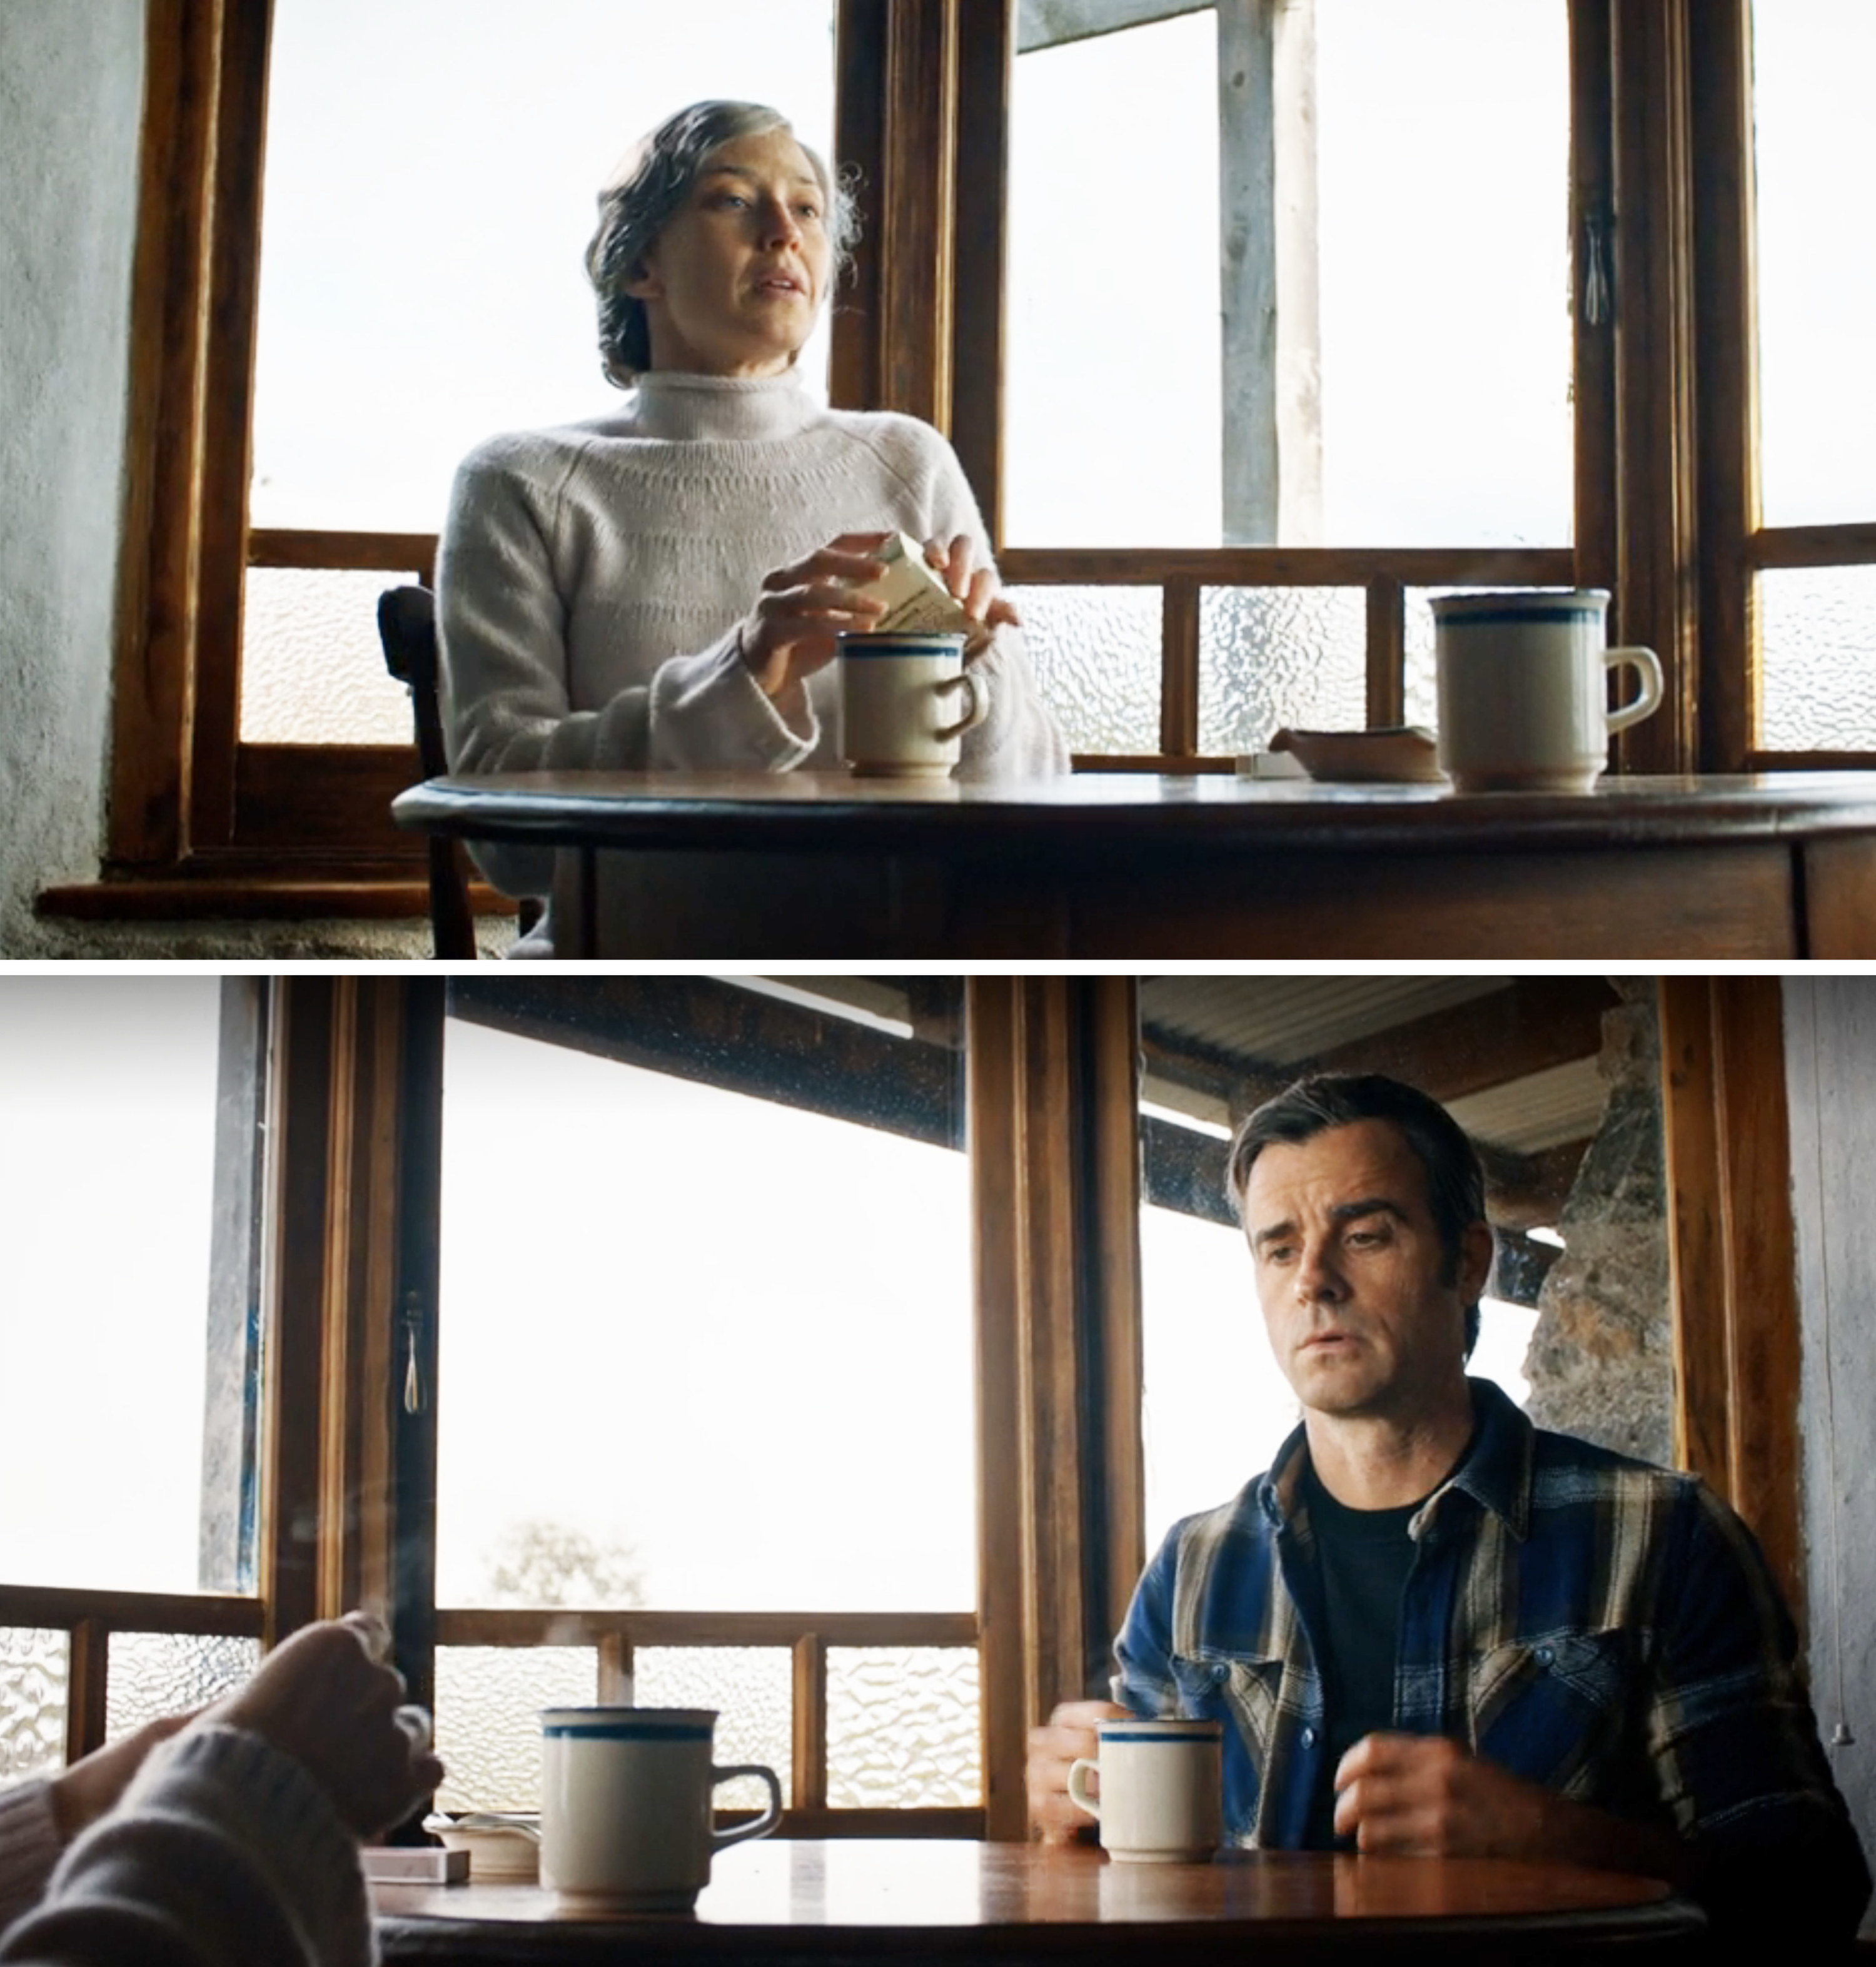 Nora Durst and Kevin Garvey sitting at a table and having coffee